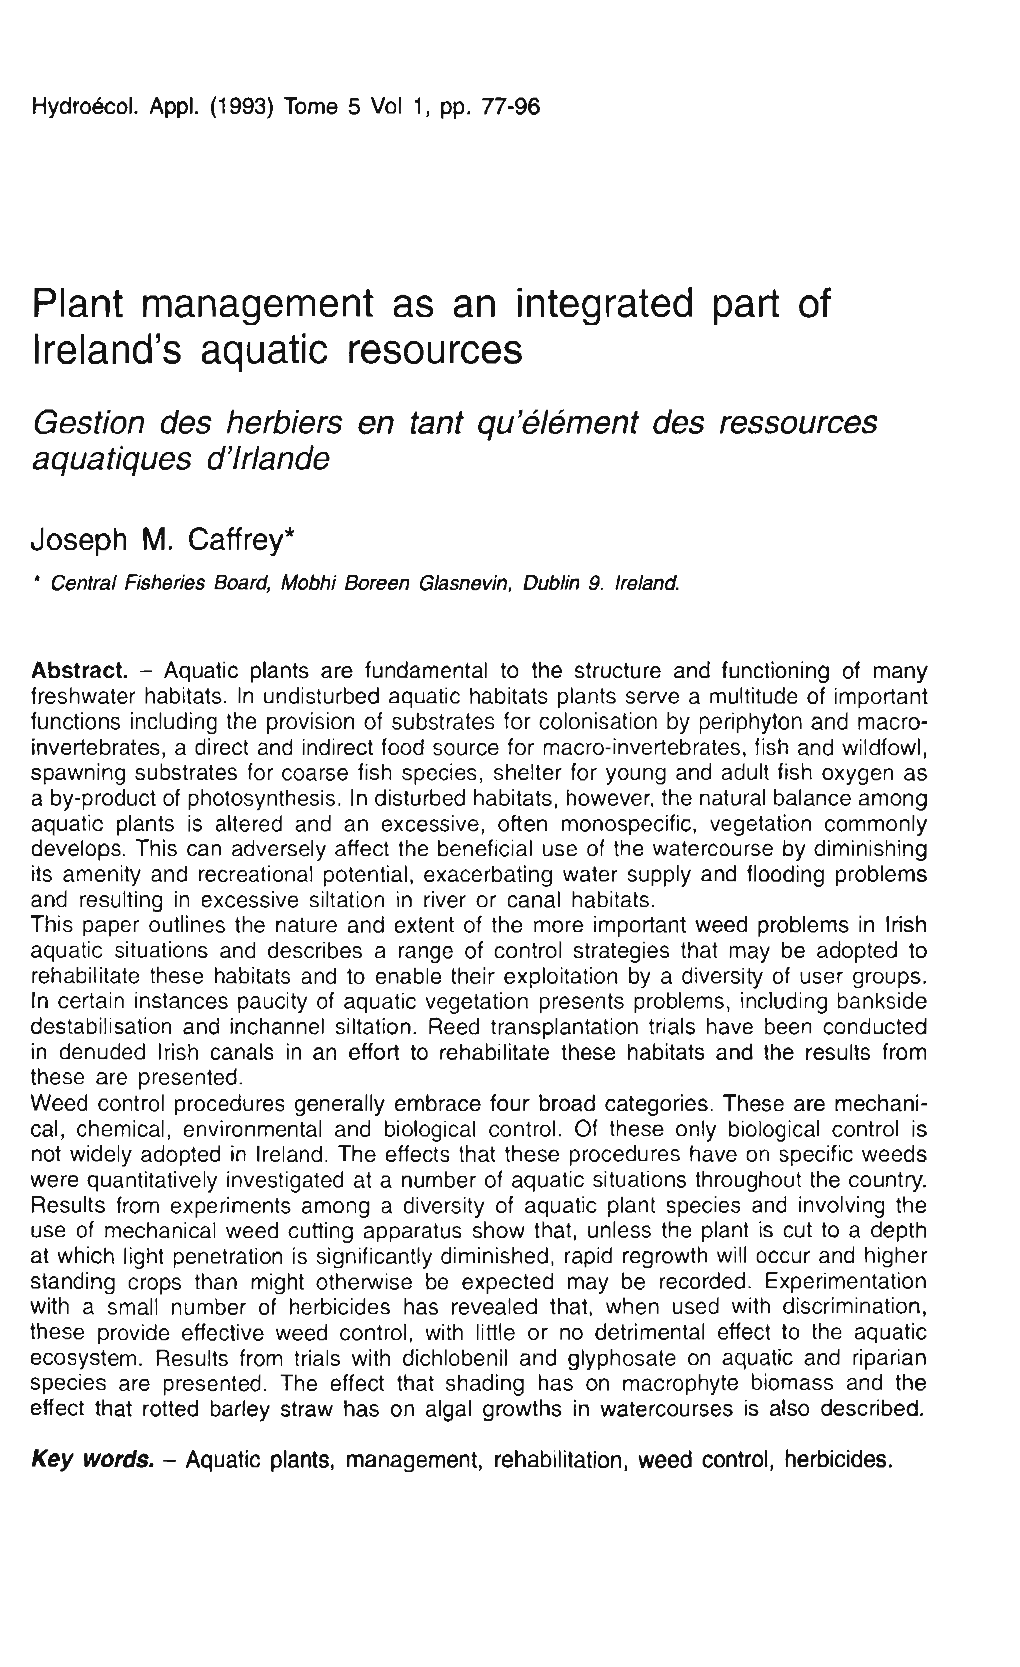 Plant Management As an Integrated Part of Ireland\'S Aquatic Resources